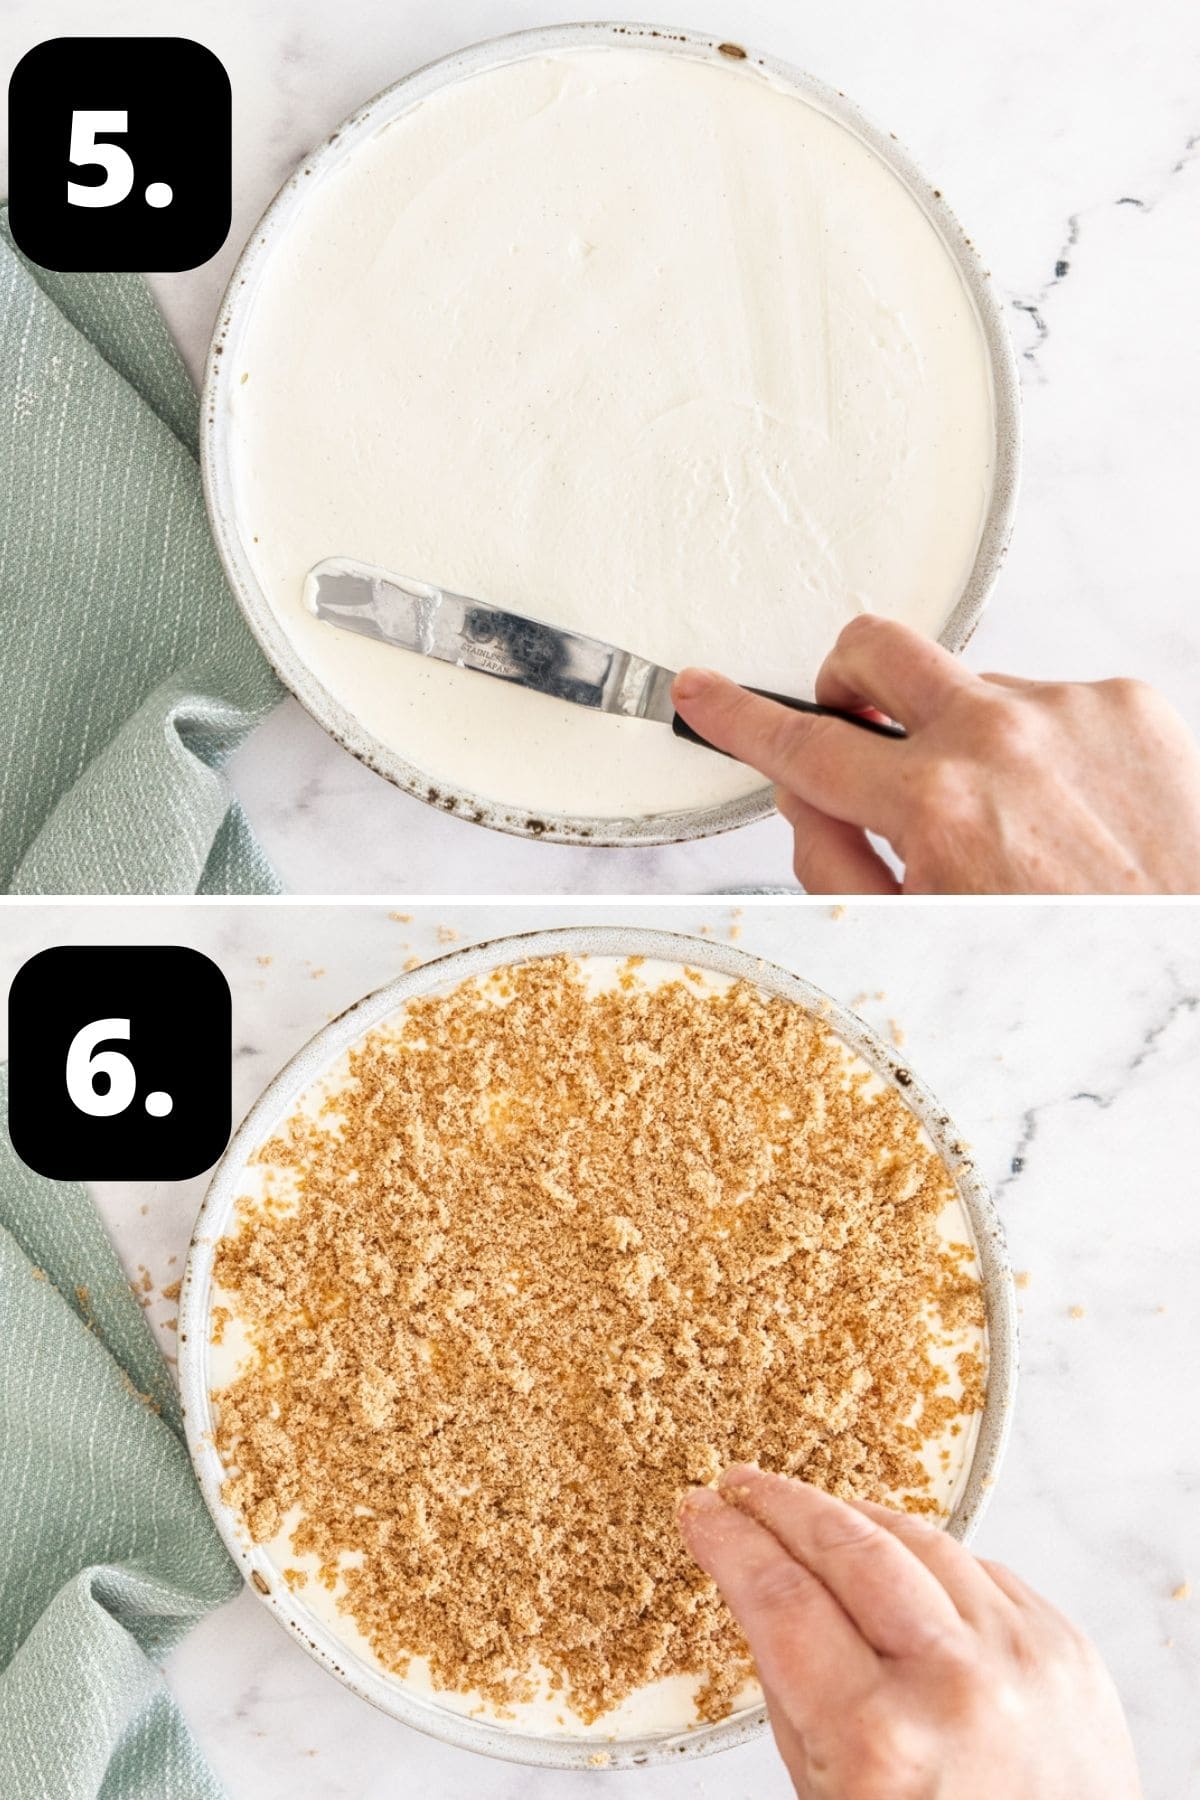 Steps 5-6 of preparing this recipe: smoothing out the yoghurt cream mixture in a dish and topping the dish with brown sugar.